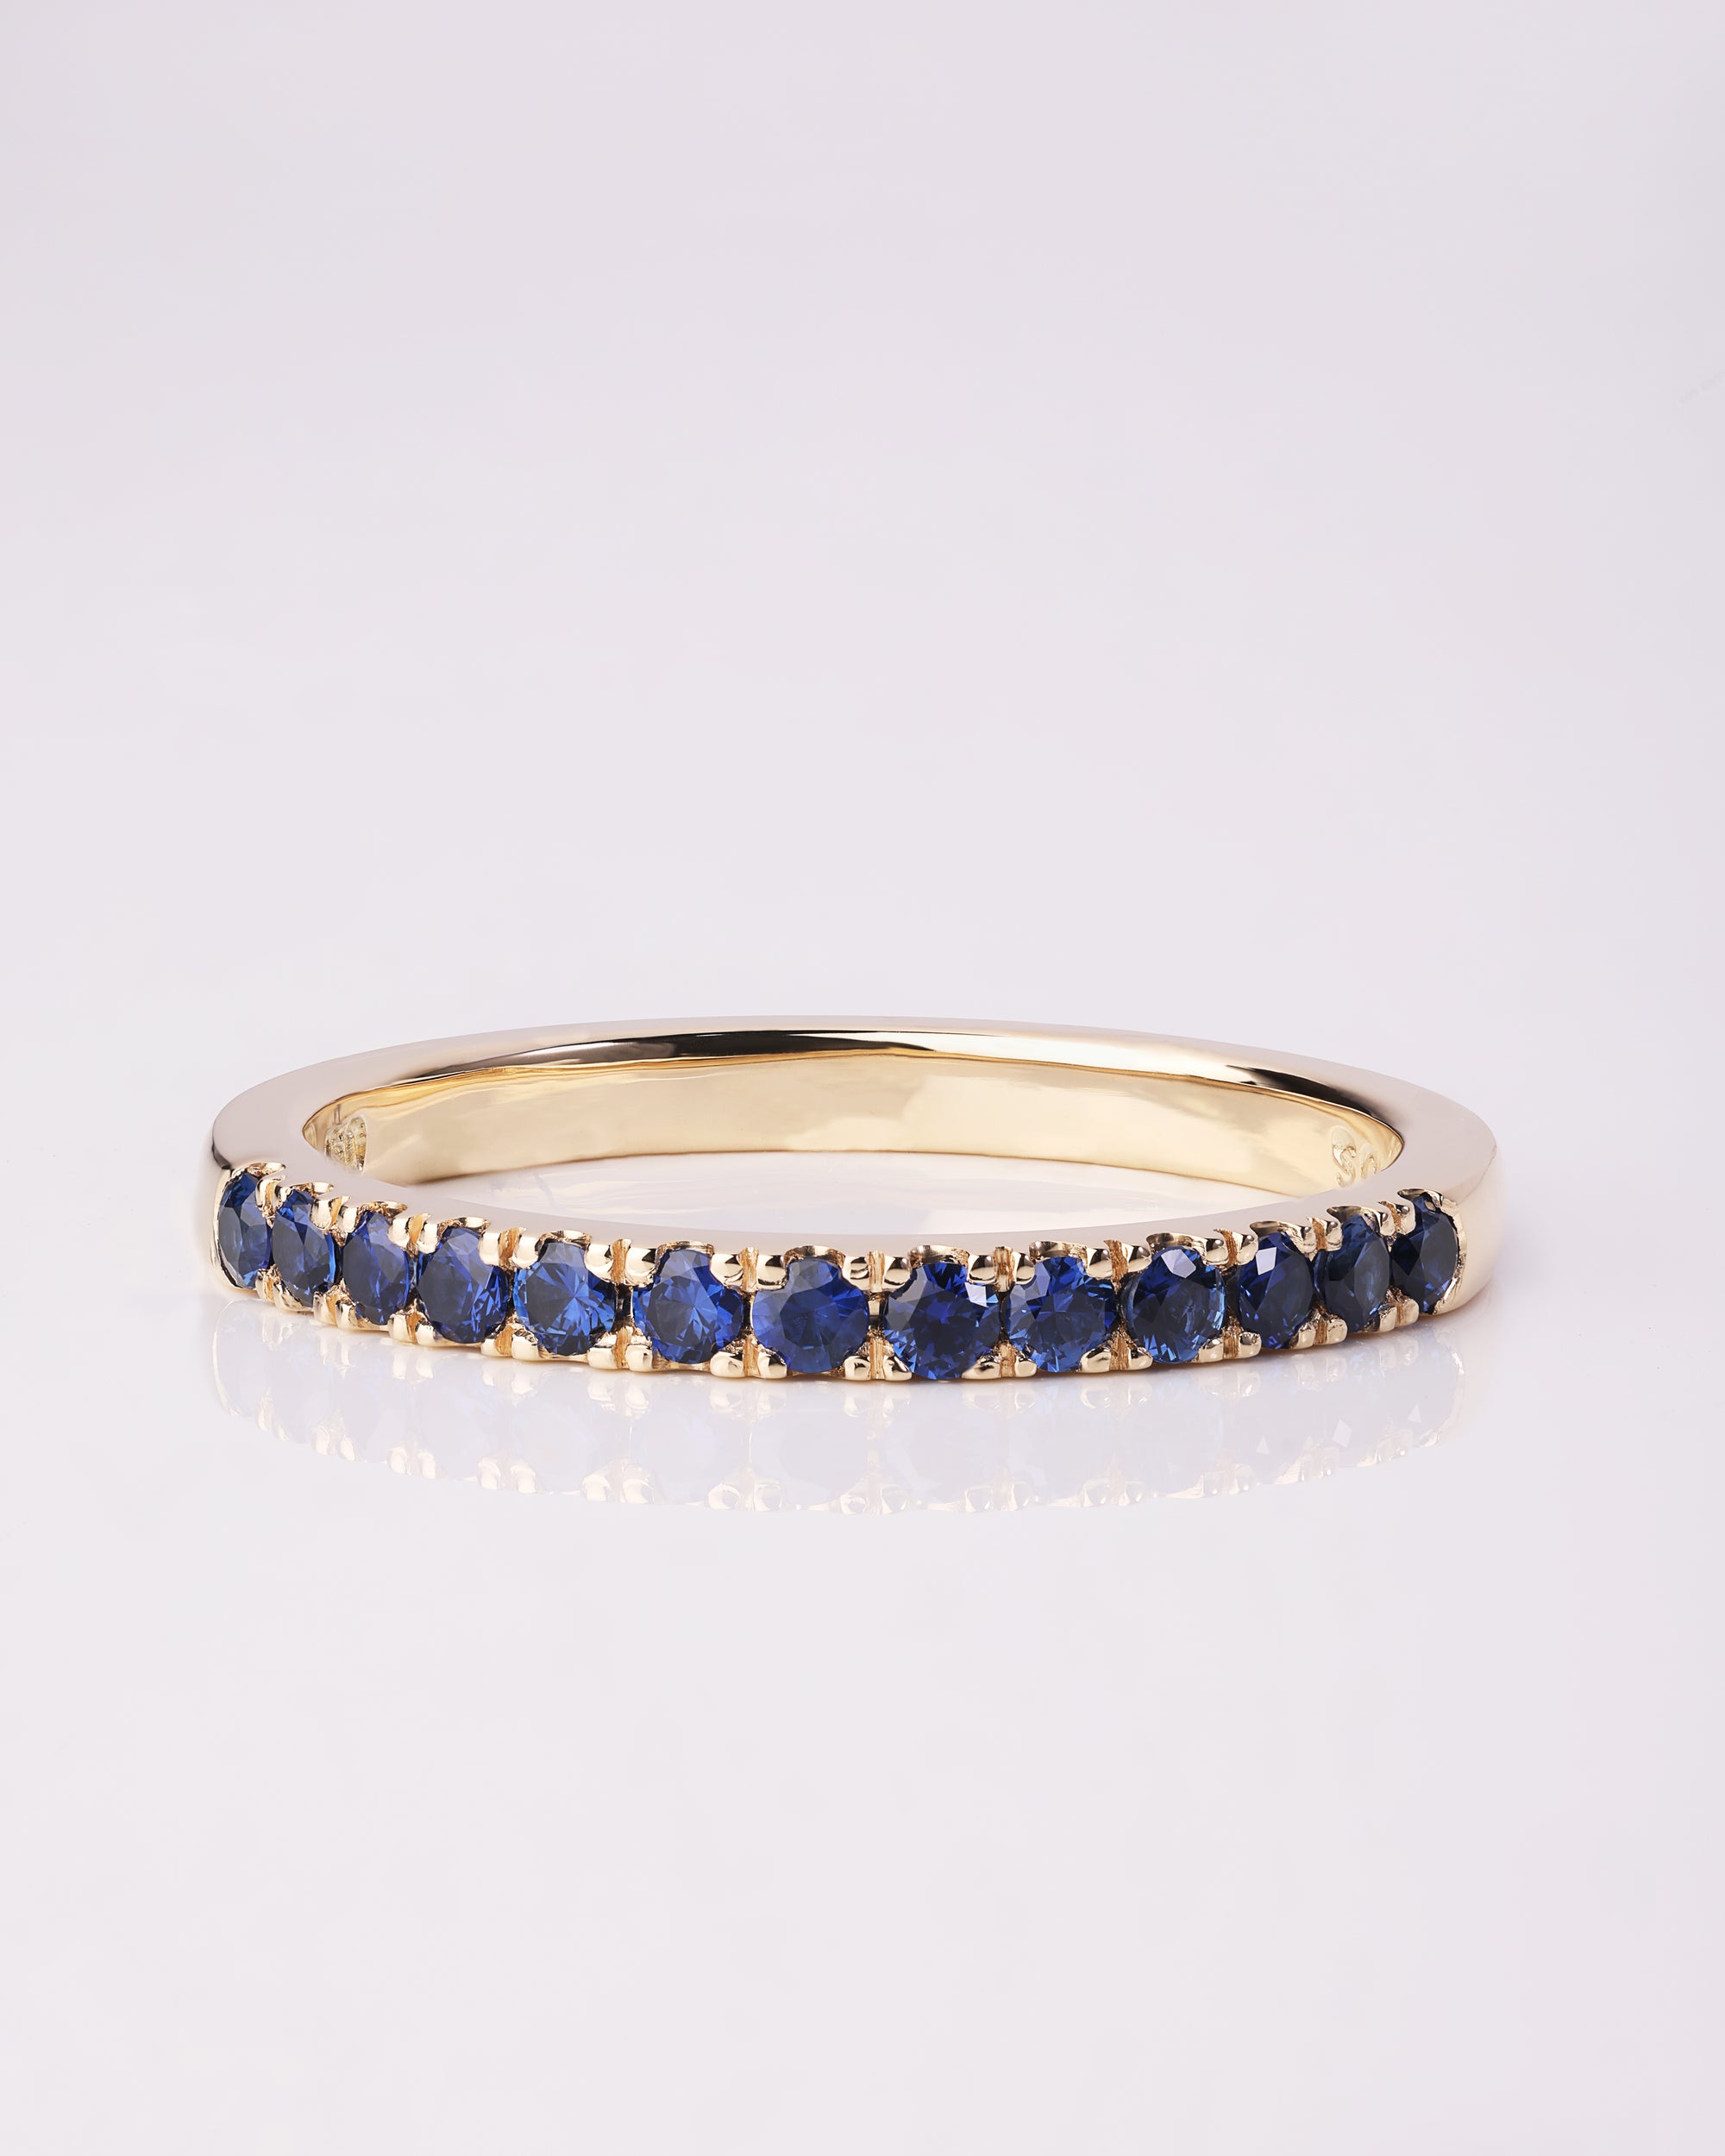 Handcrafted 18ct Yellow Gold band half set with Round Brilliant Cut Blue Sapphires.